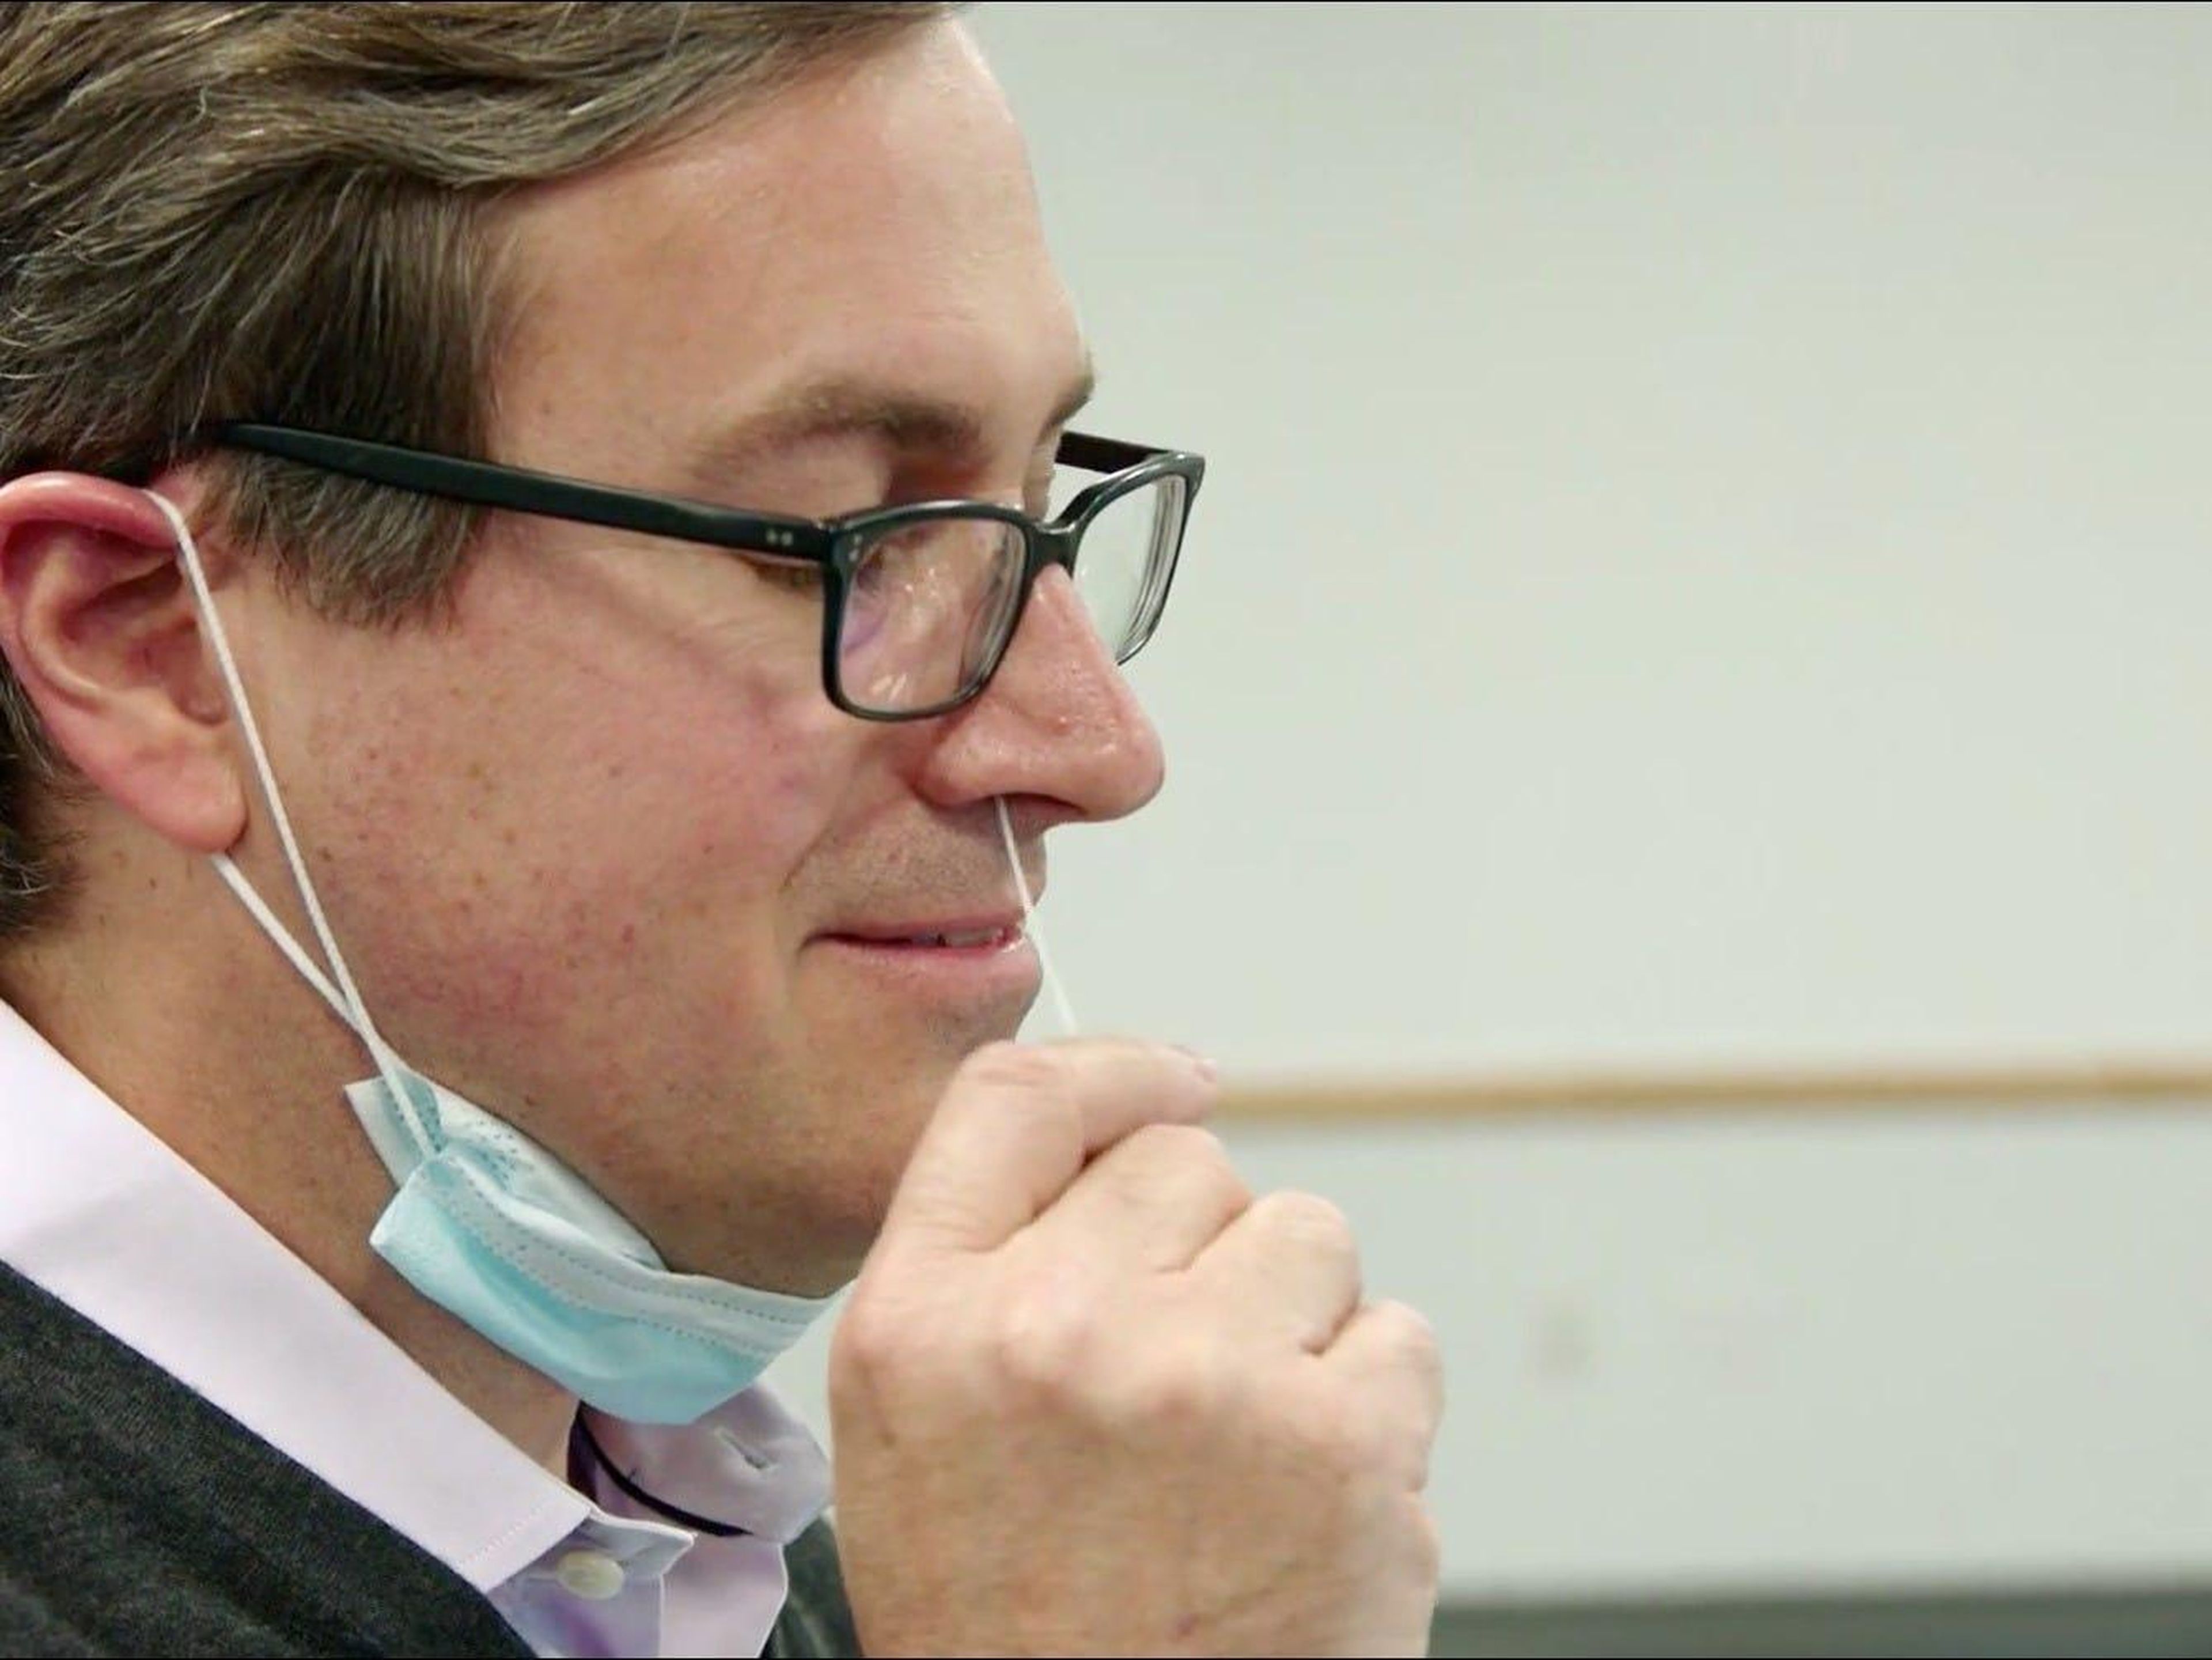 Amazon vice president of worldwide operations Dave Clark swabs himself for COVID-19 during a CBS "60 Minutes" segment.